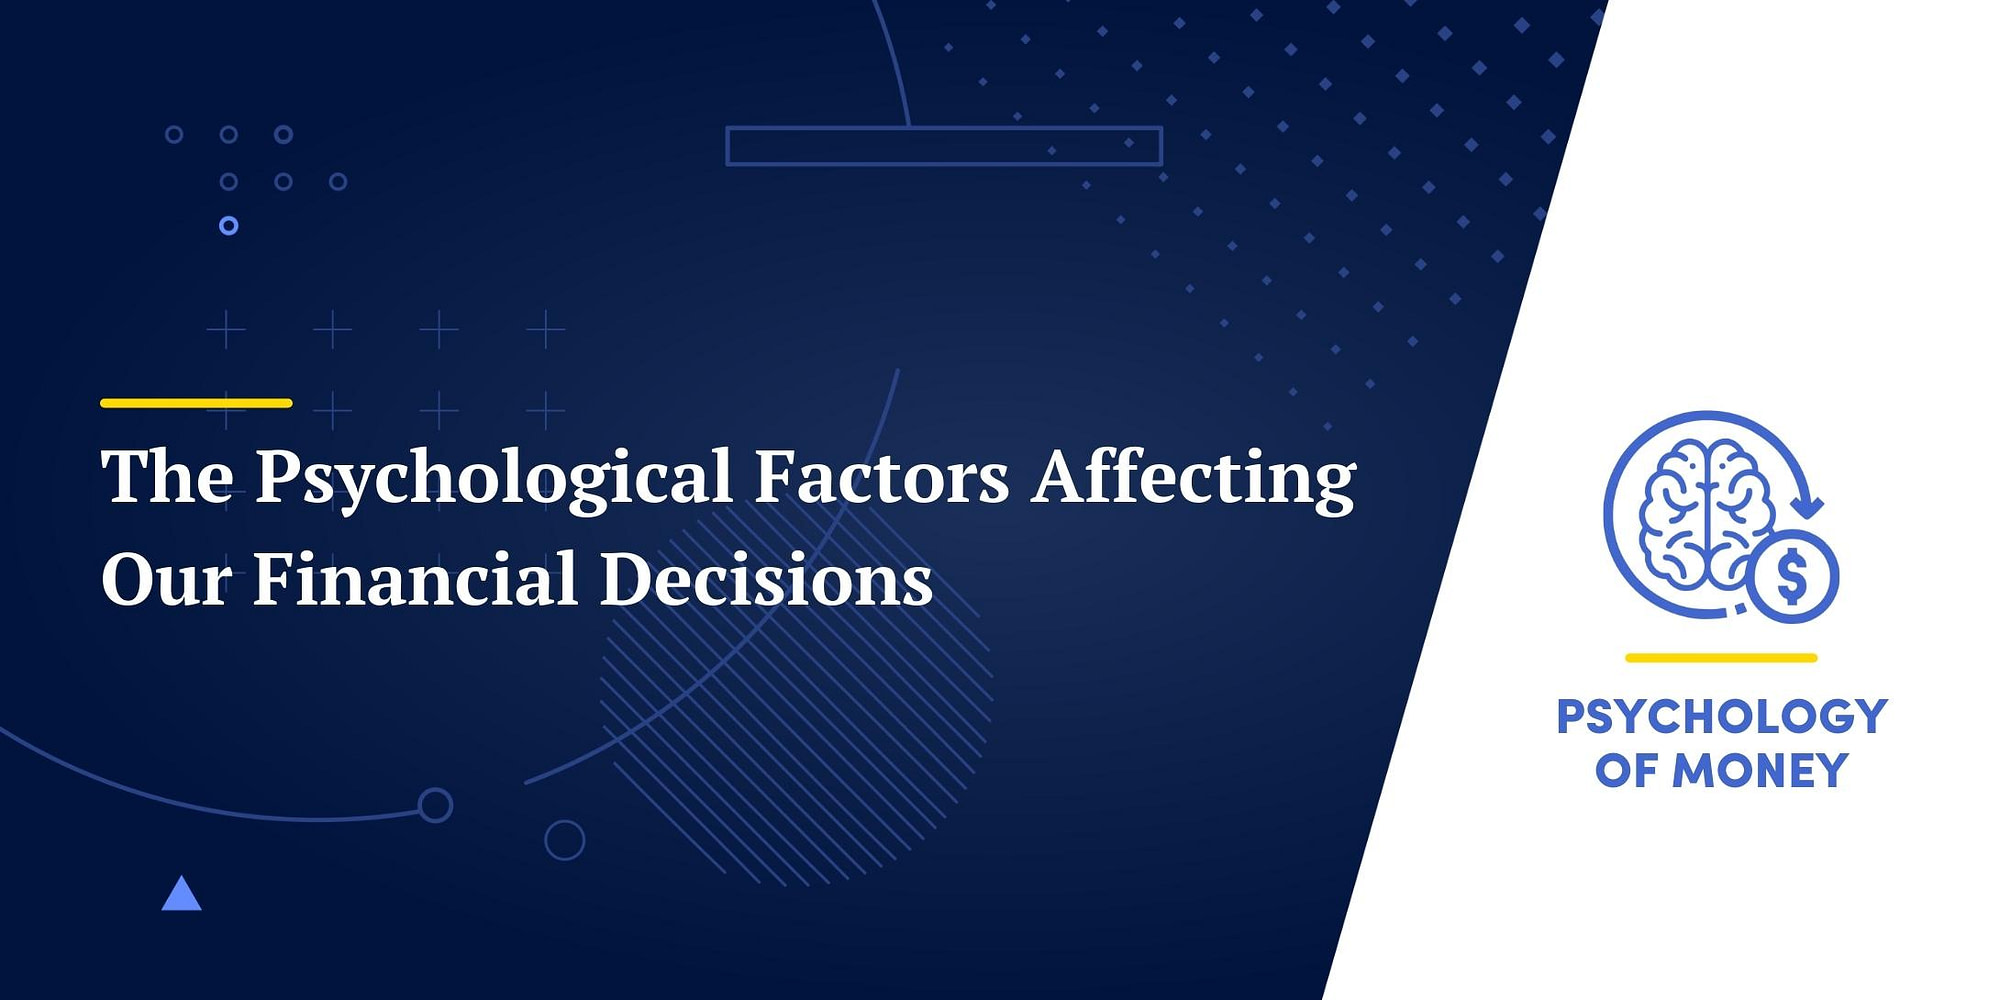 The Psychological Factors Affecting Our Financial Decisions